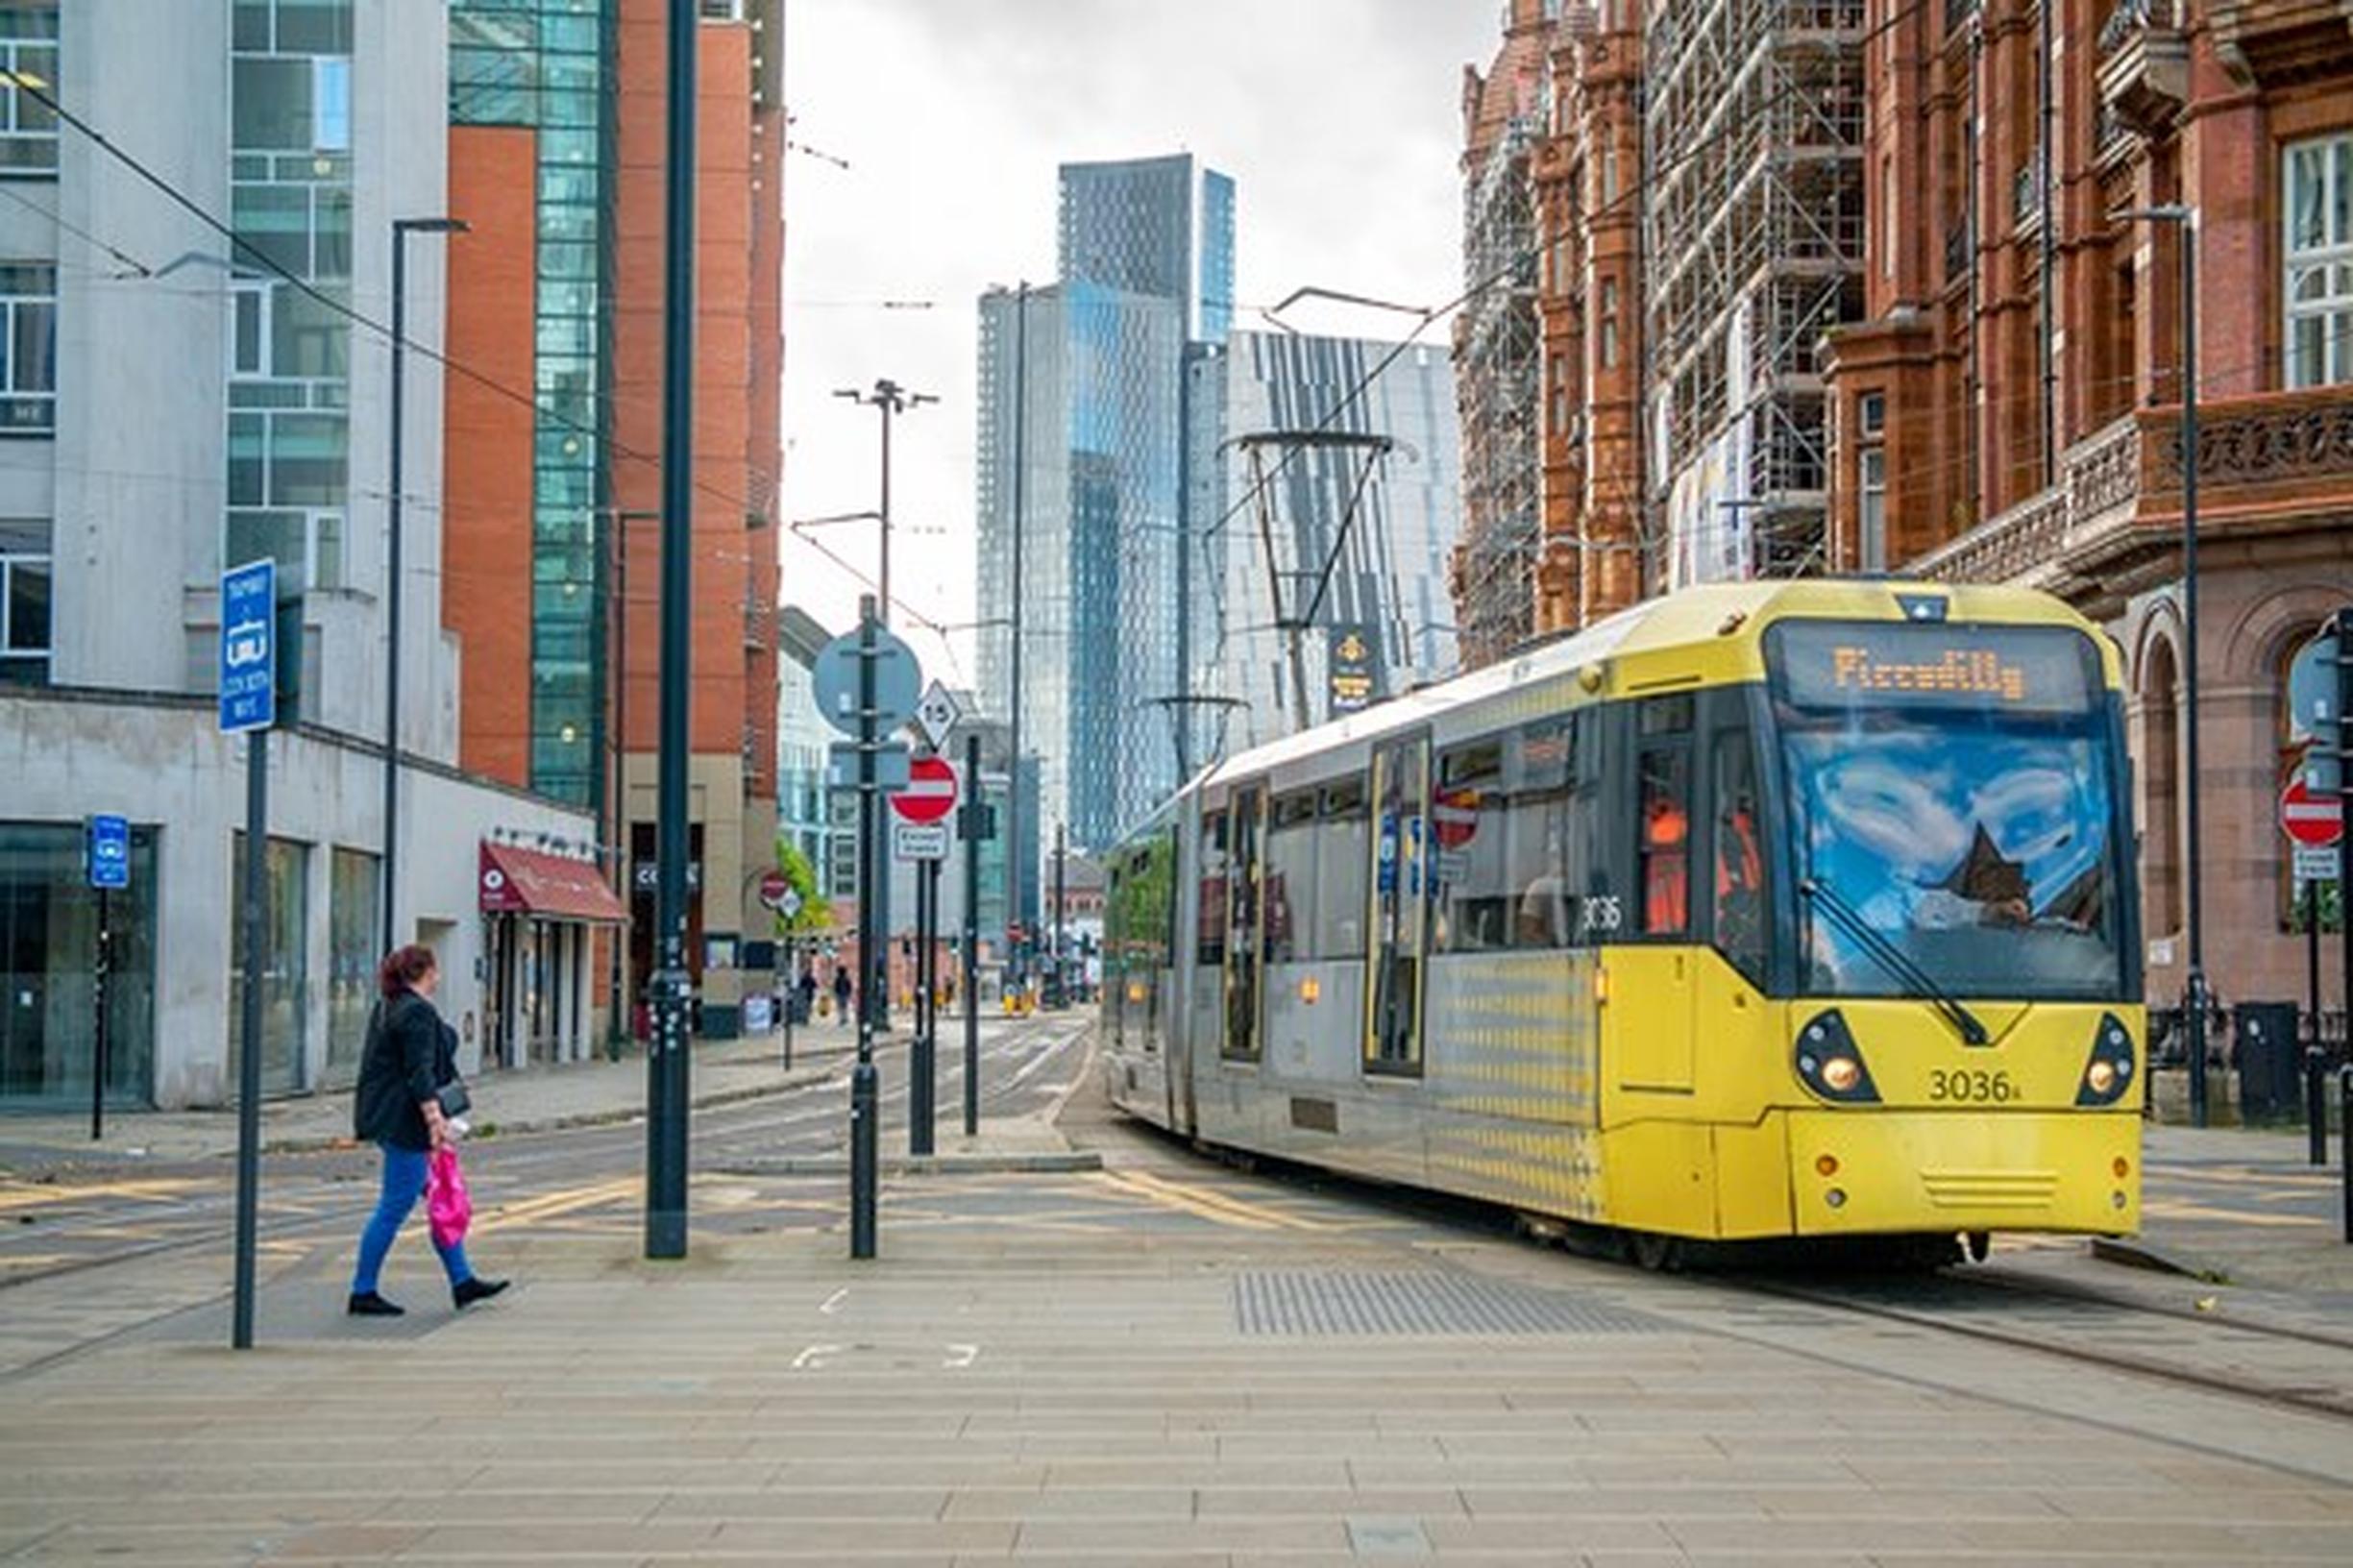 The mask mandate covers Manchester Metrolink services